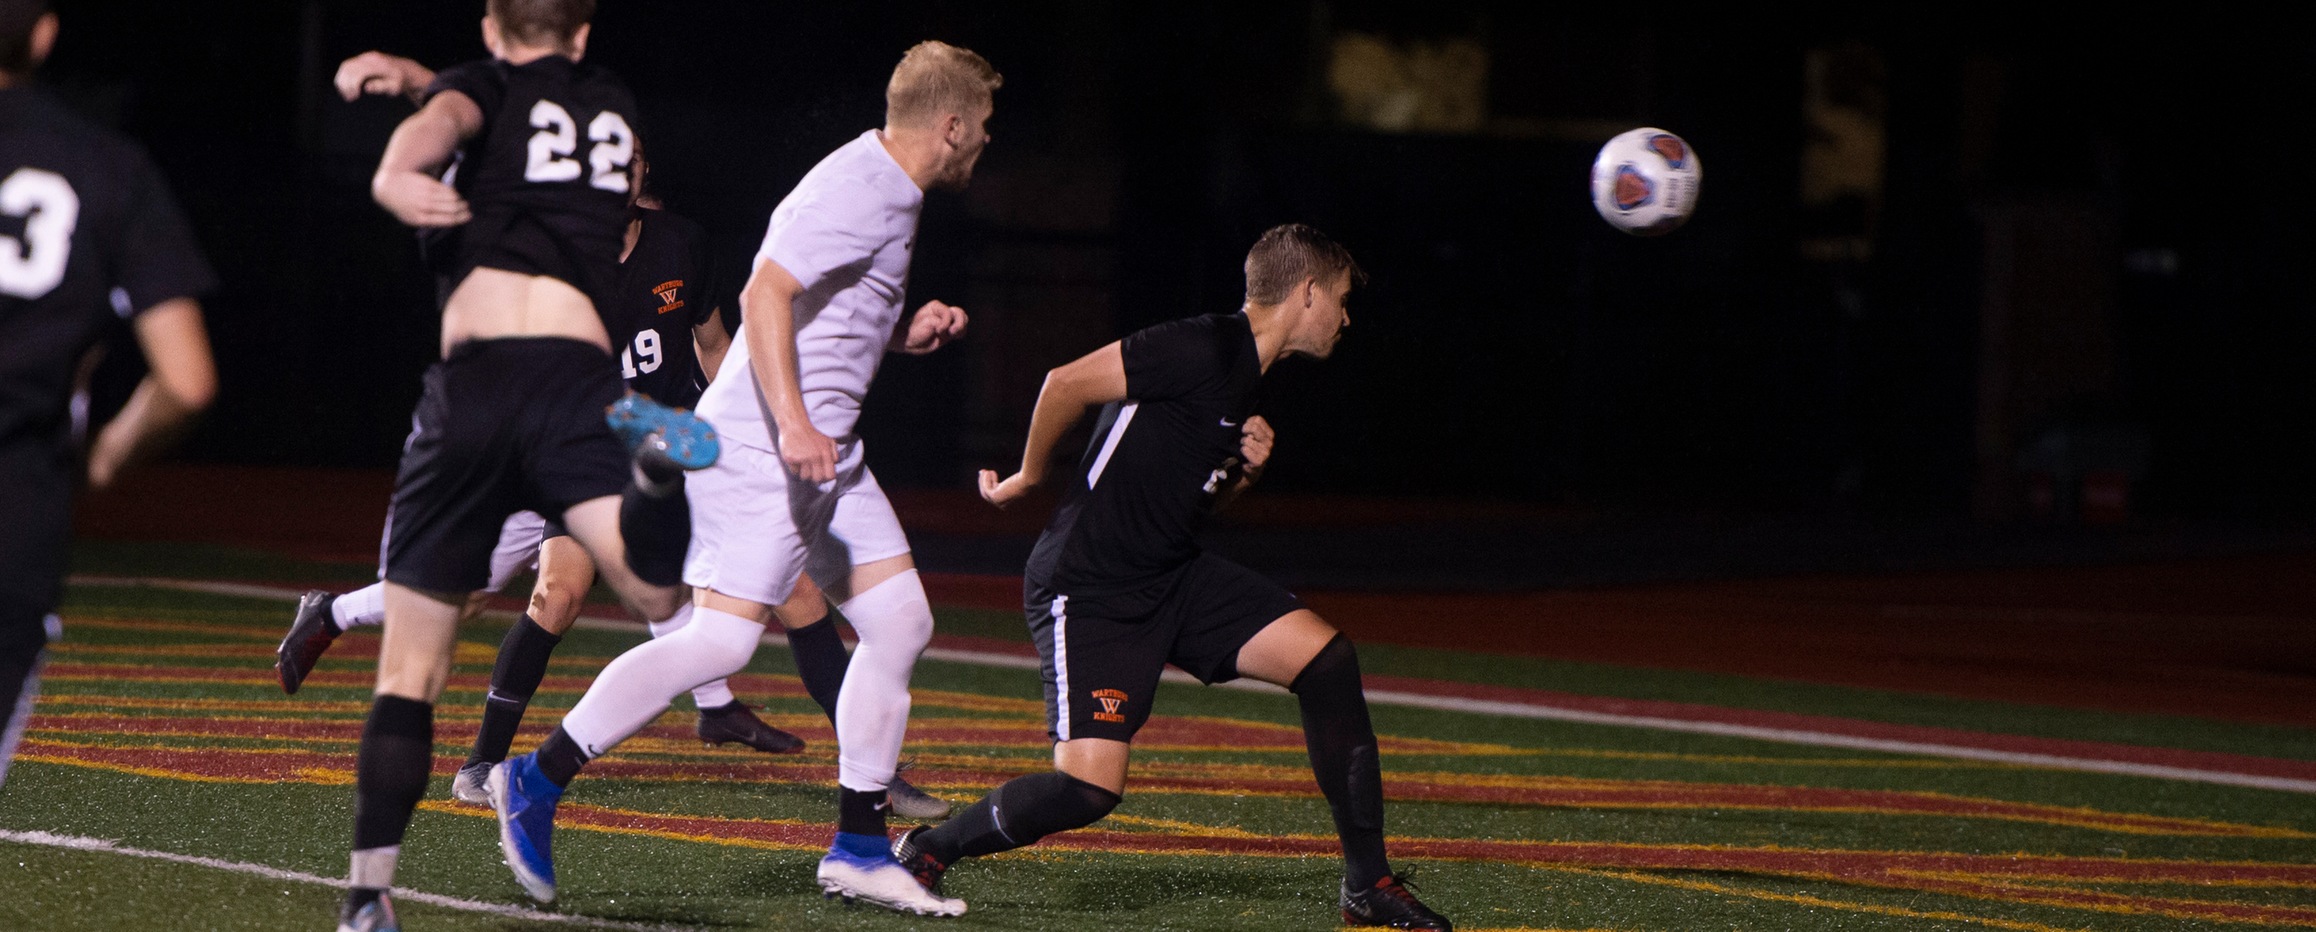 Tanner Alderson scores a golden goal in the 101st minute to lift Storm over Wartburg.